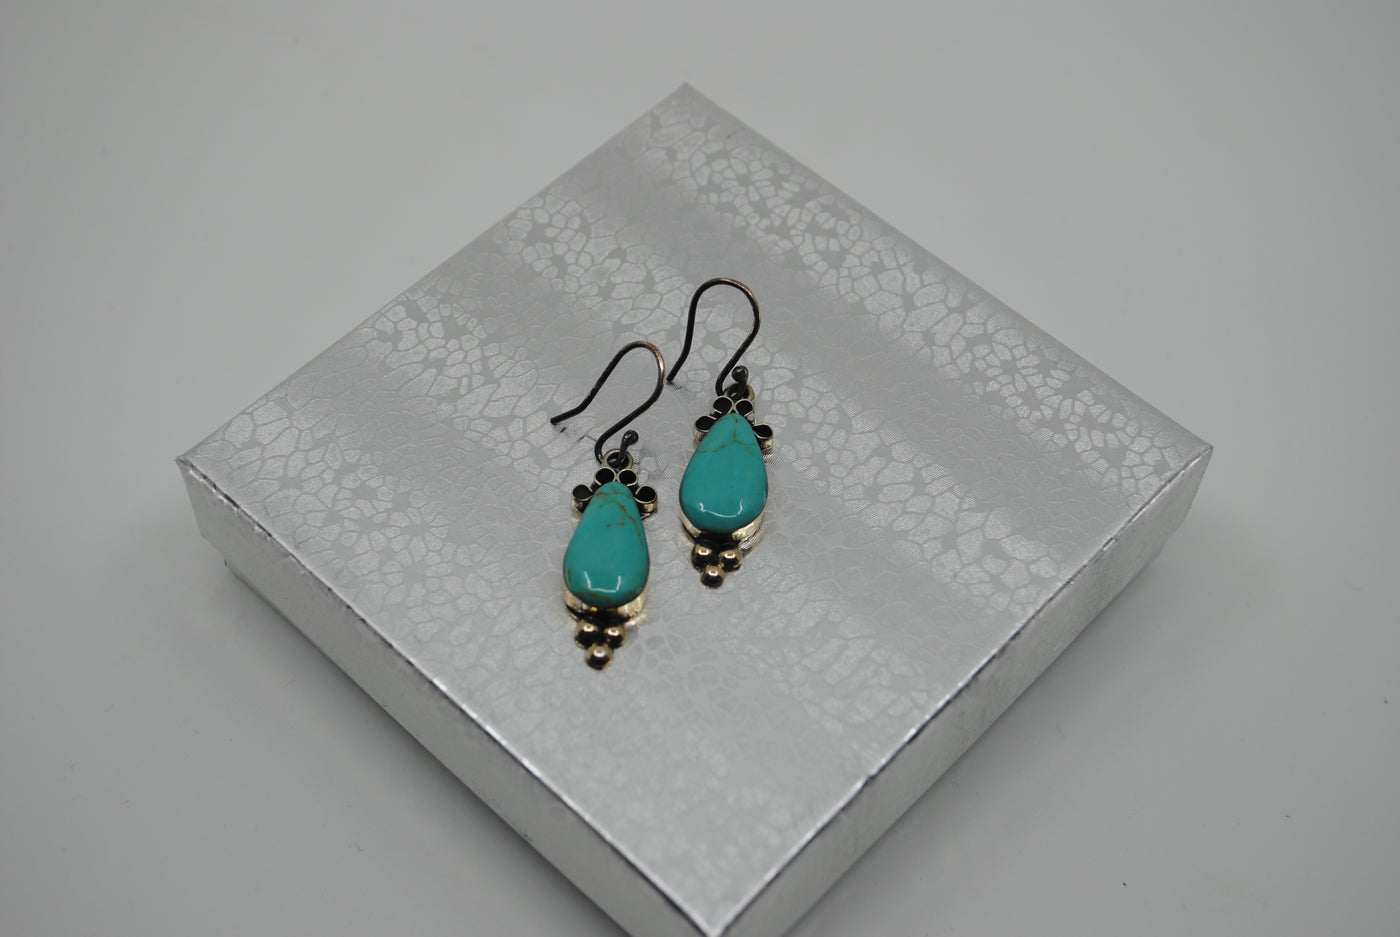 Handmade Sterling Silver and Turquoise Drop Earrings PSTPE31